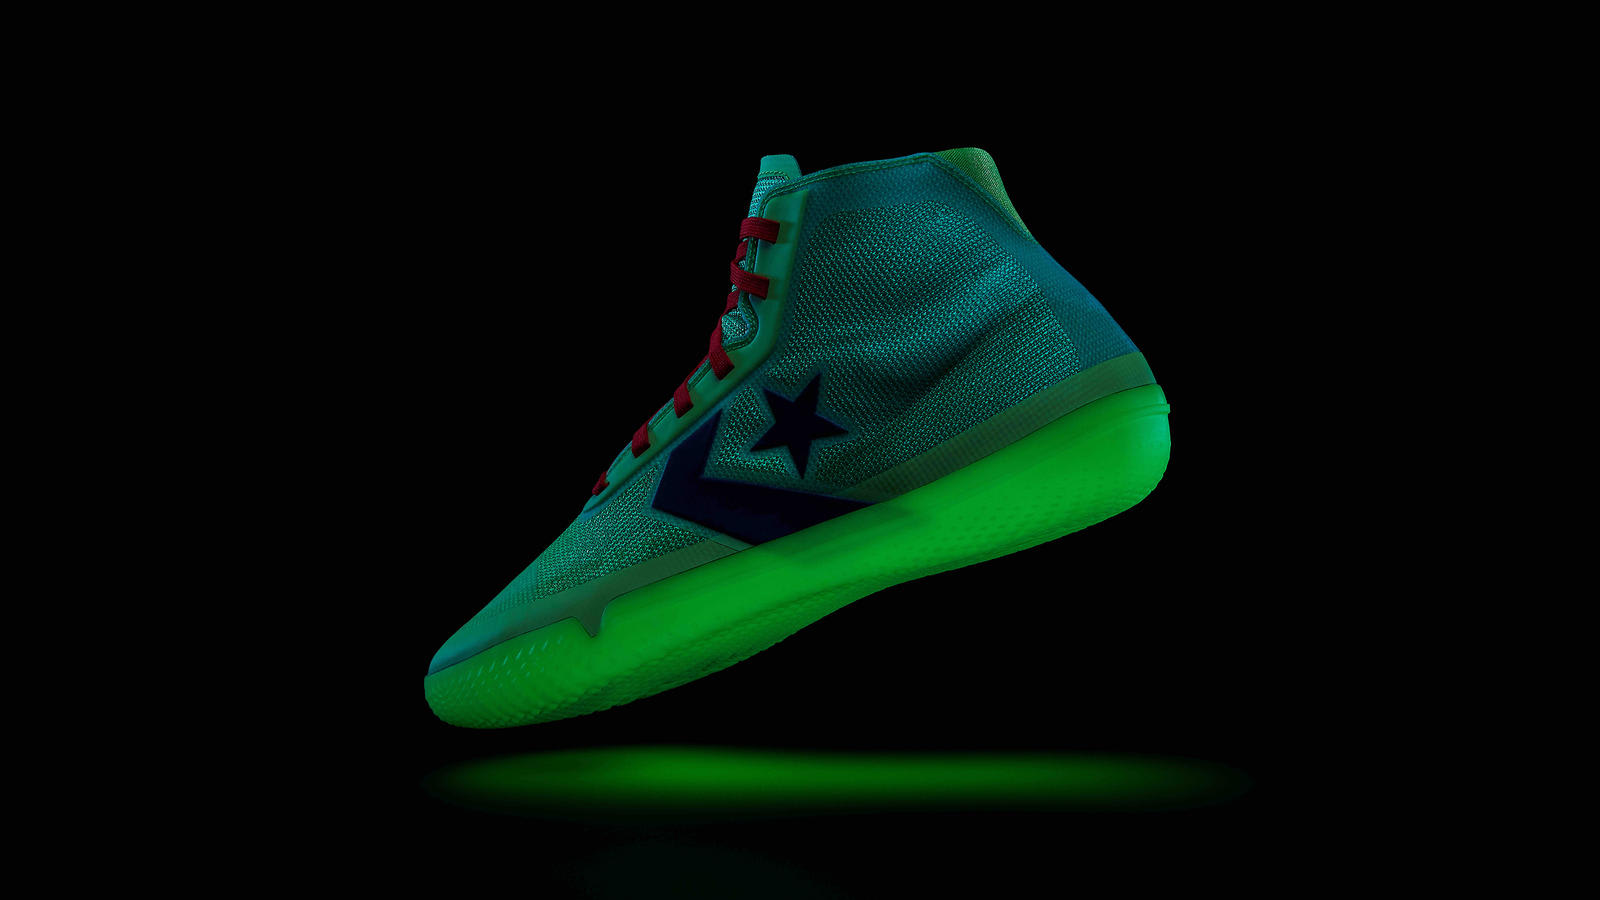 converse-all-star-pro-bb-nocturnal-lateral-glow-in-the-dark